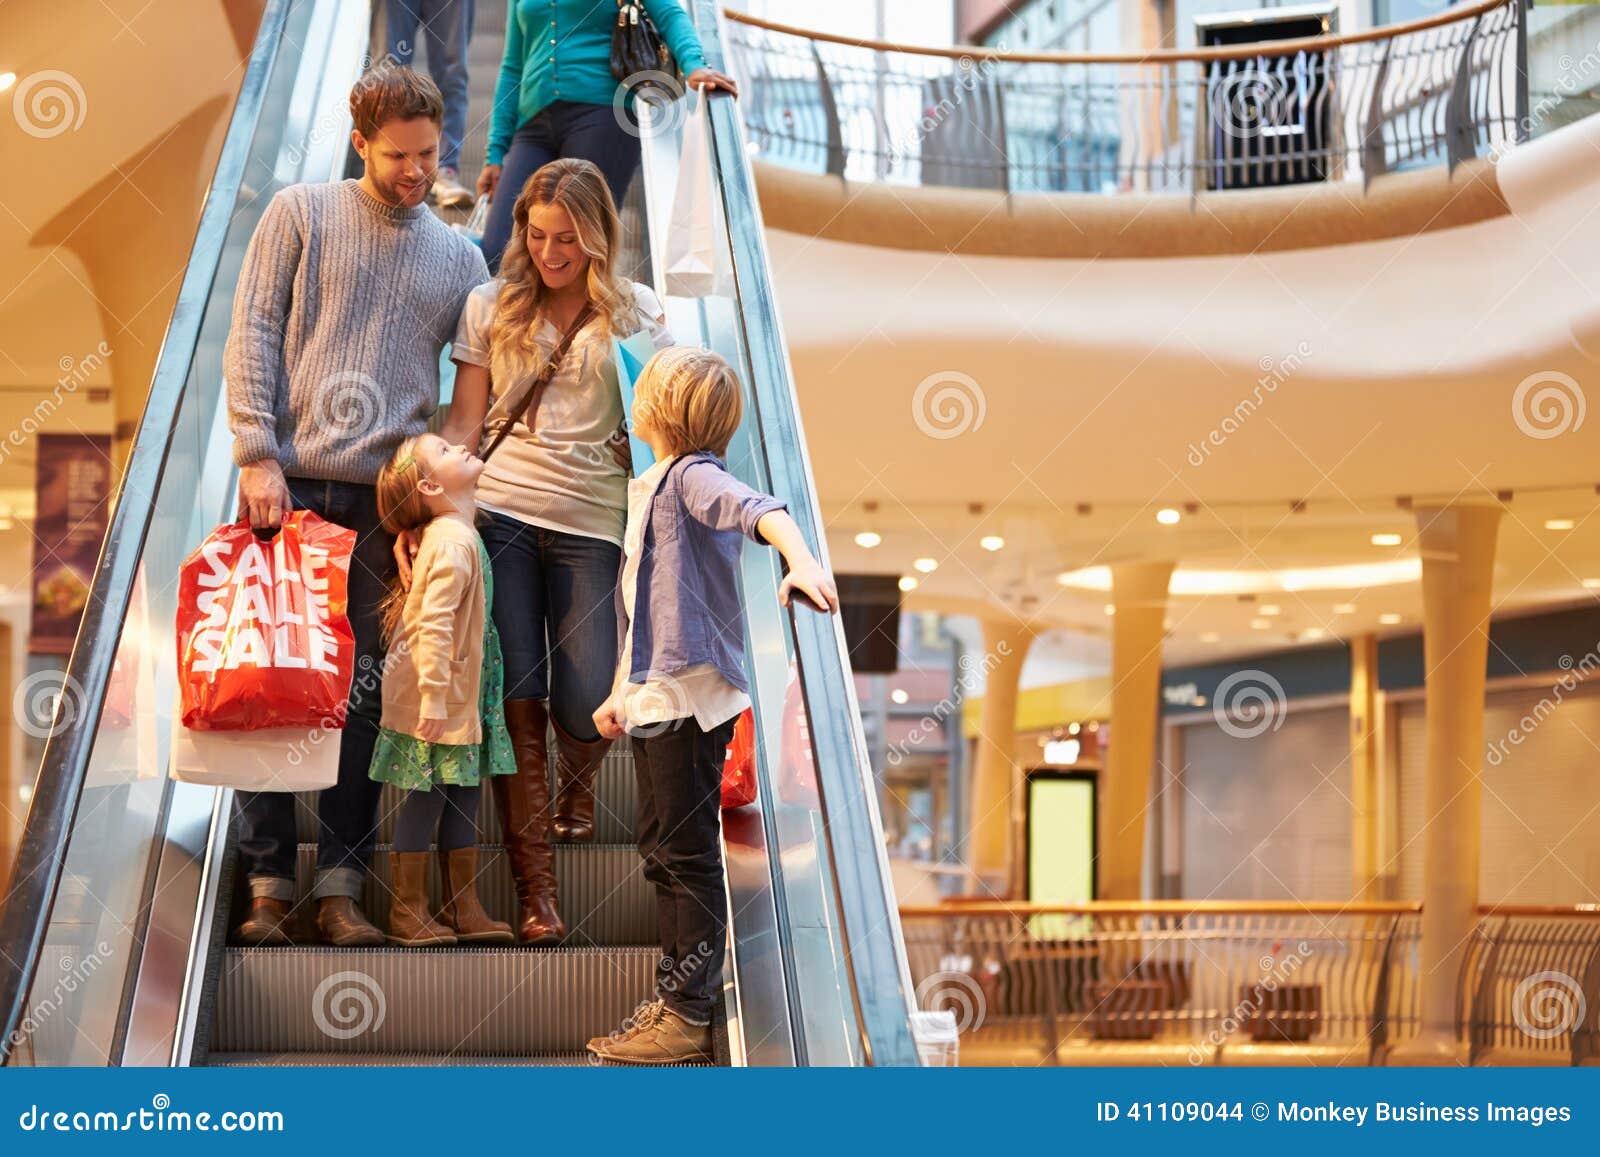 family on escalator in shopping mall together